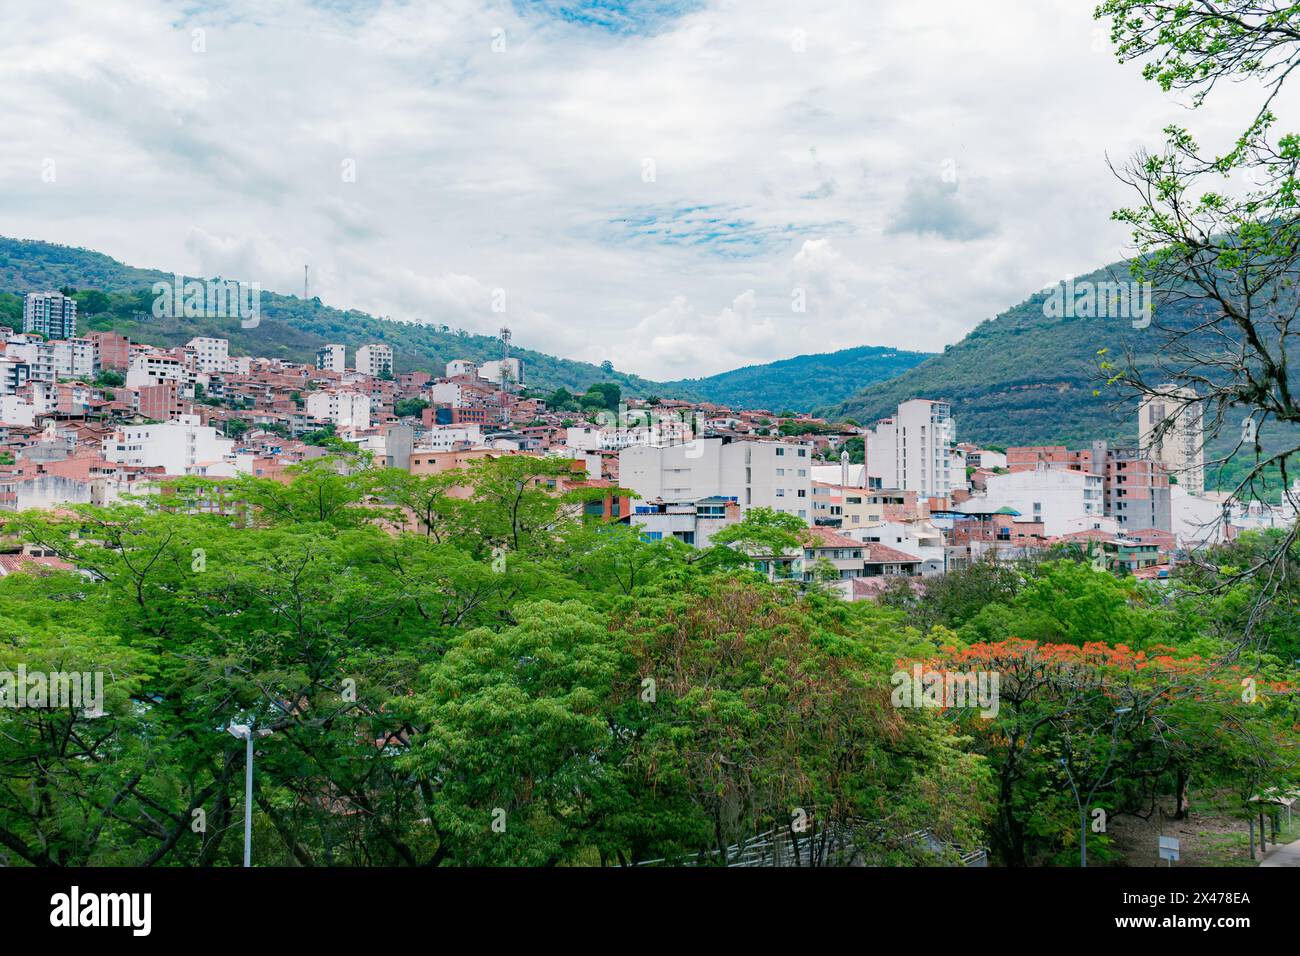 landscape of the city of San Gil Santander, Colombia, on a sunny day with the mountain in the background Stock Photo